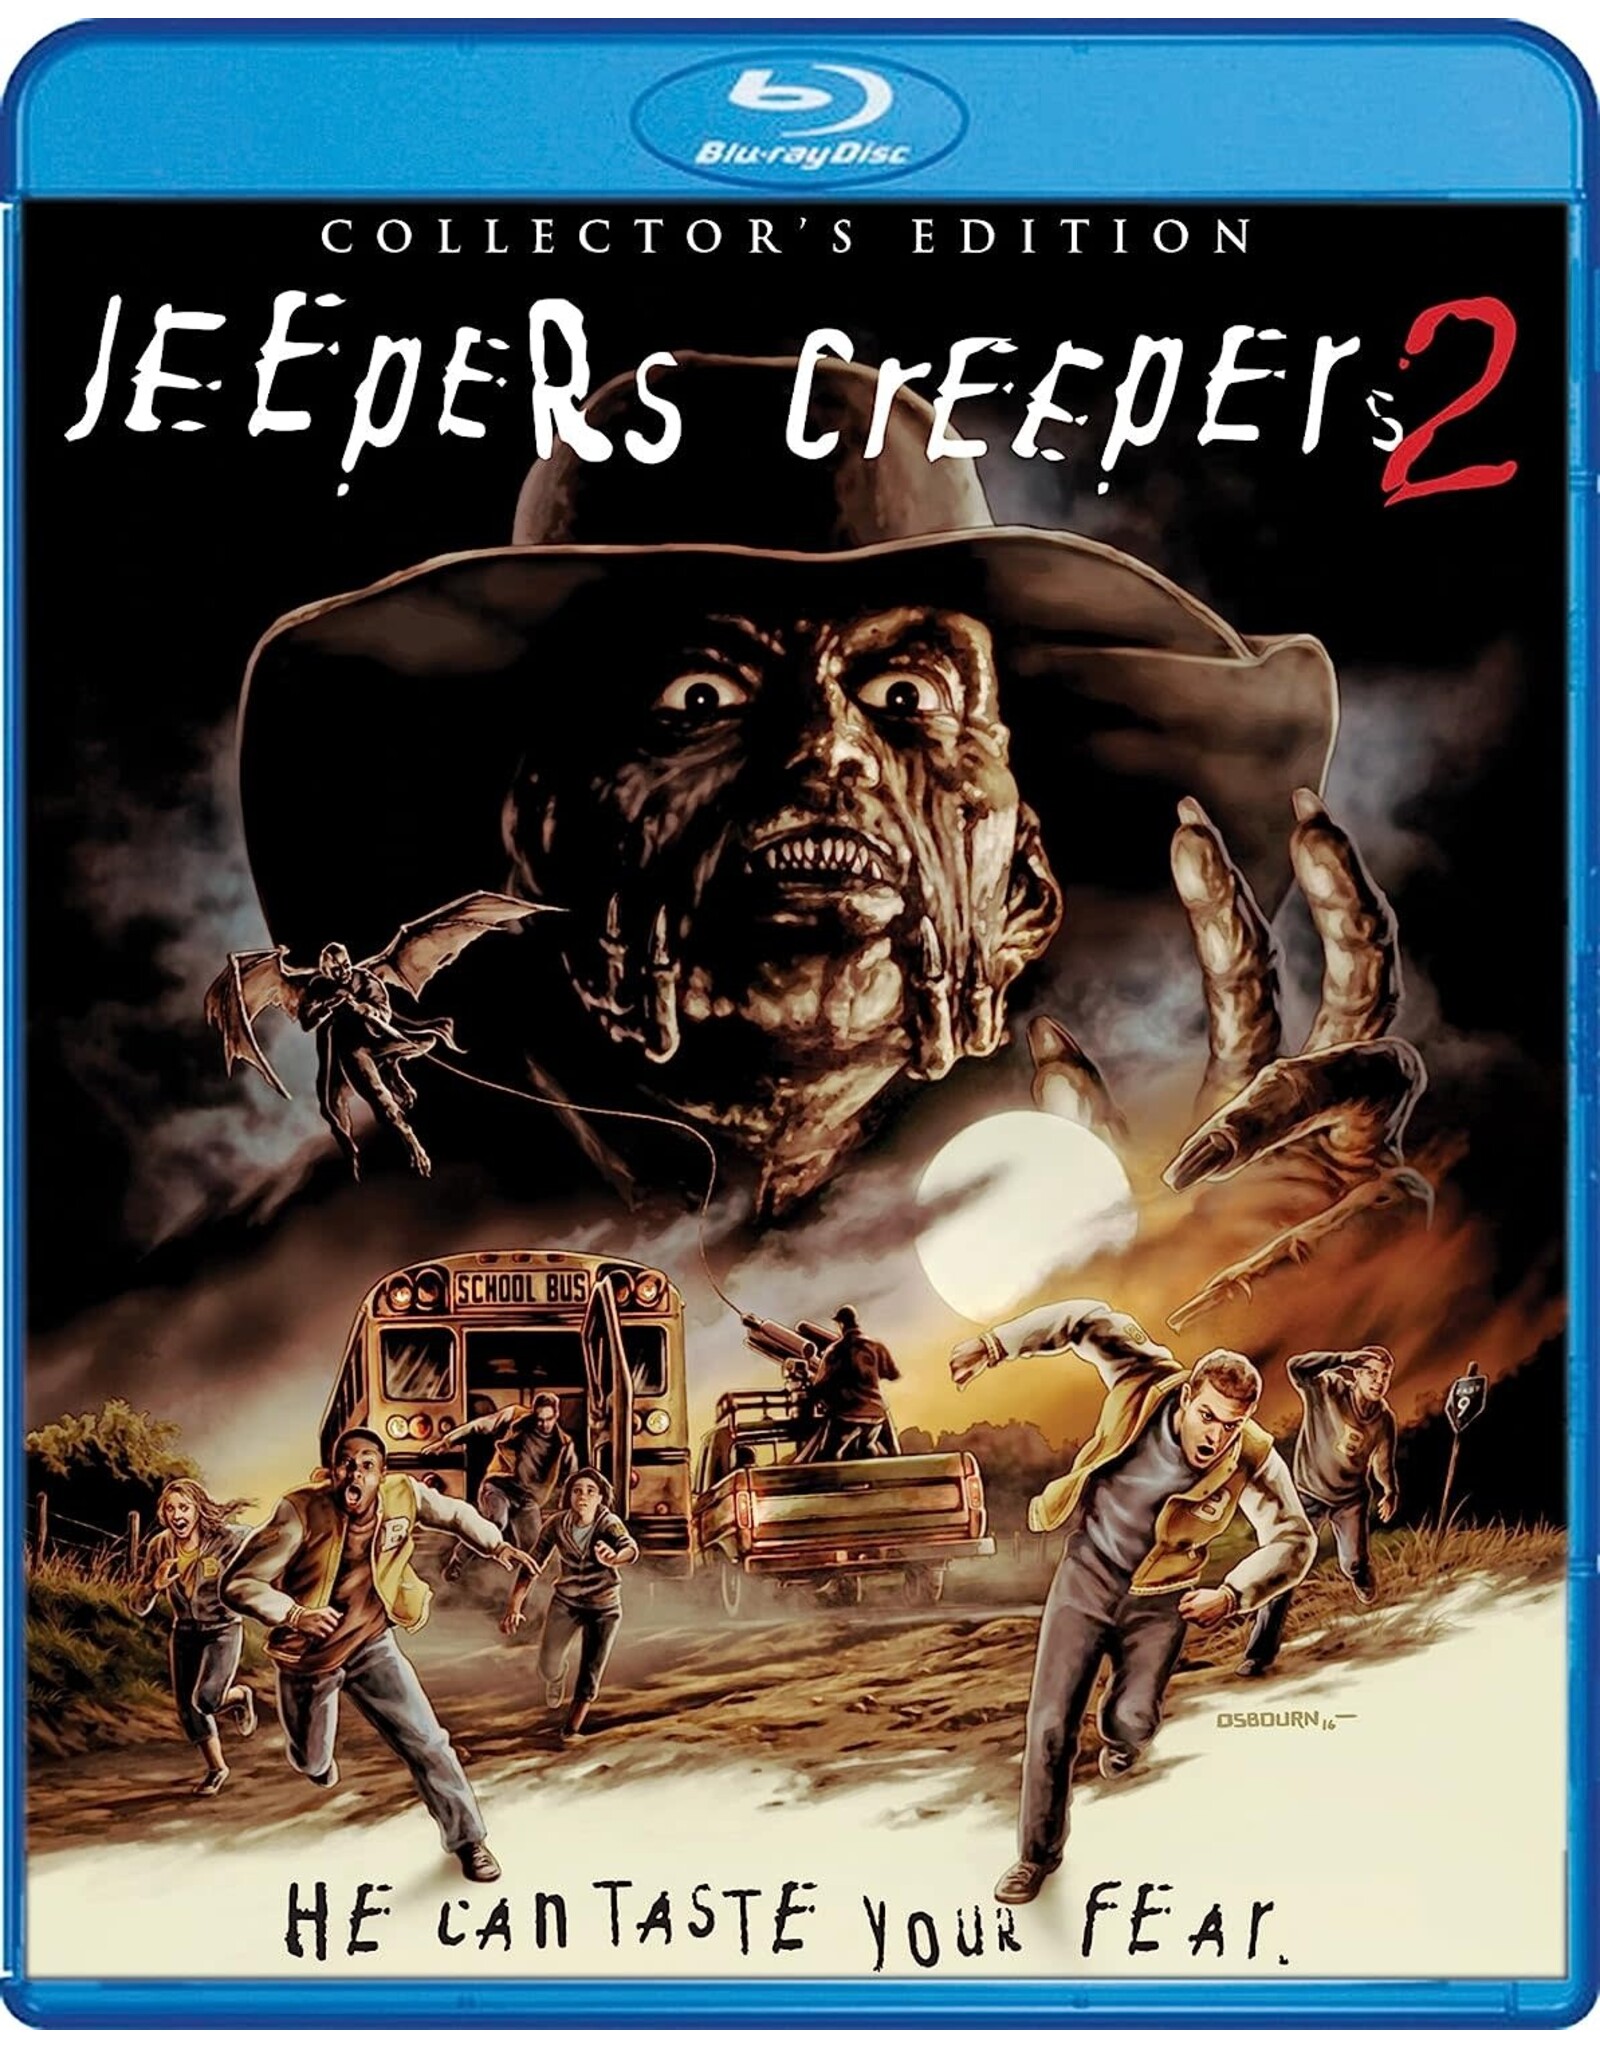 Horror Jeepers Creepers 2 Collector's Edition - Scream Factory (Used, w/ Slipcover)